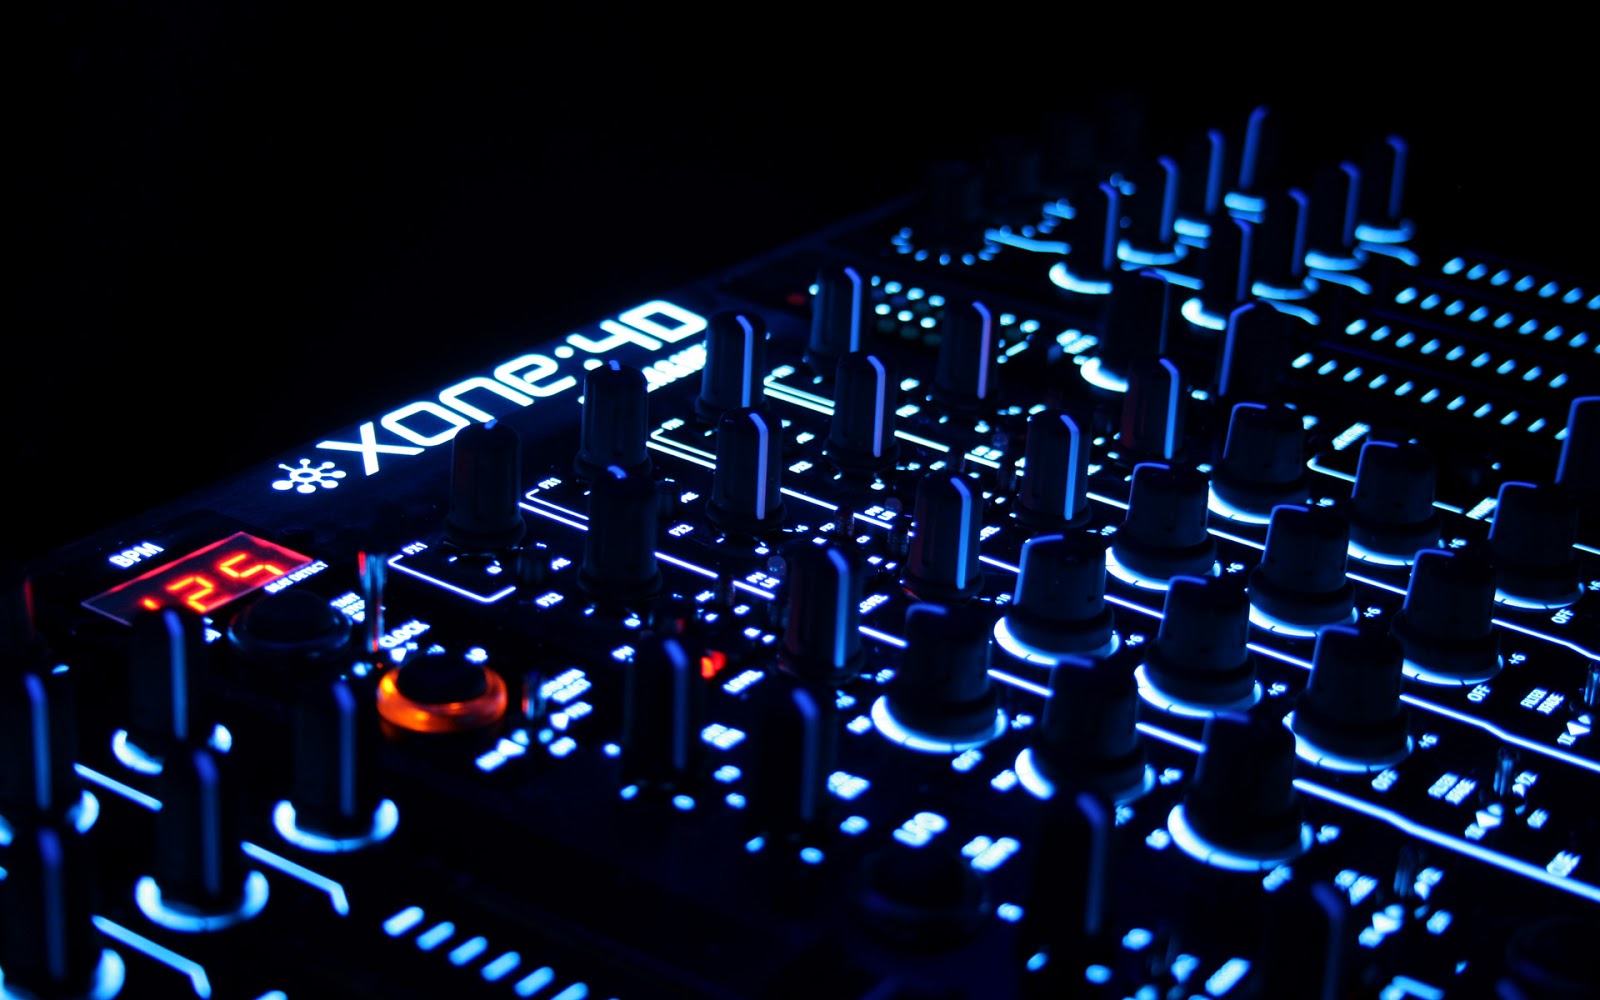  Wallpaper musical instruments sounds DJ HQ HD WALLPAPERS free